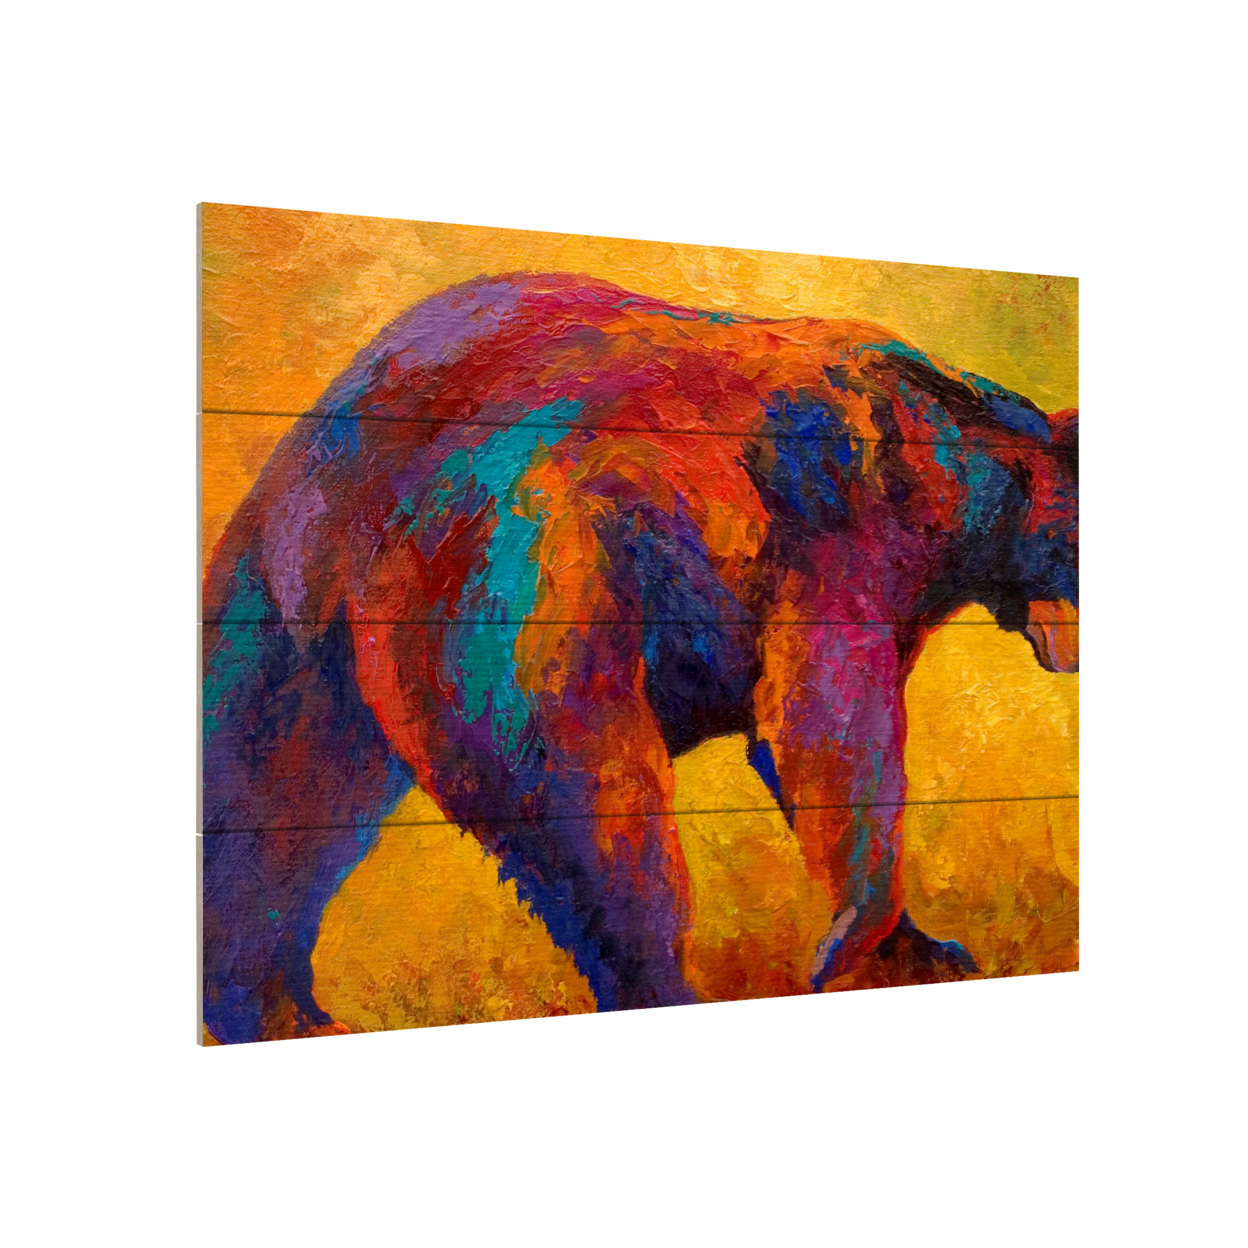 Wall Art 12 X 16 Inches Titled Daily Rounds Black Bear Ready To Hang Printed On Wooden Planks